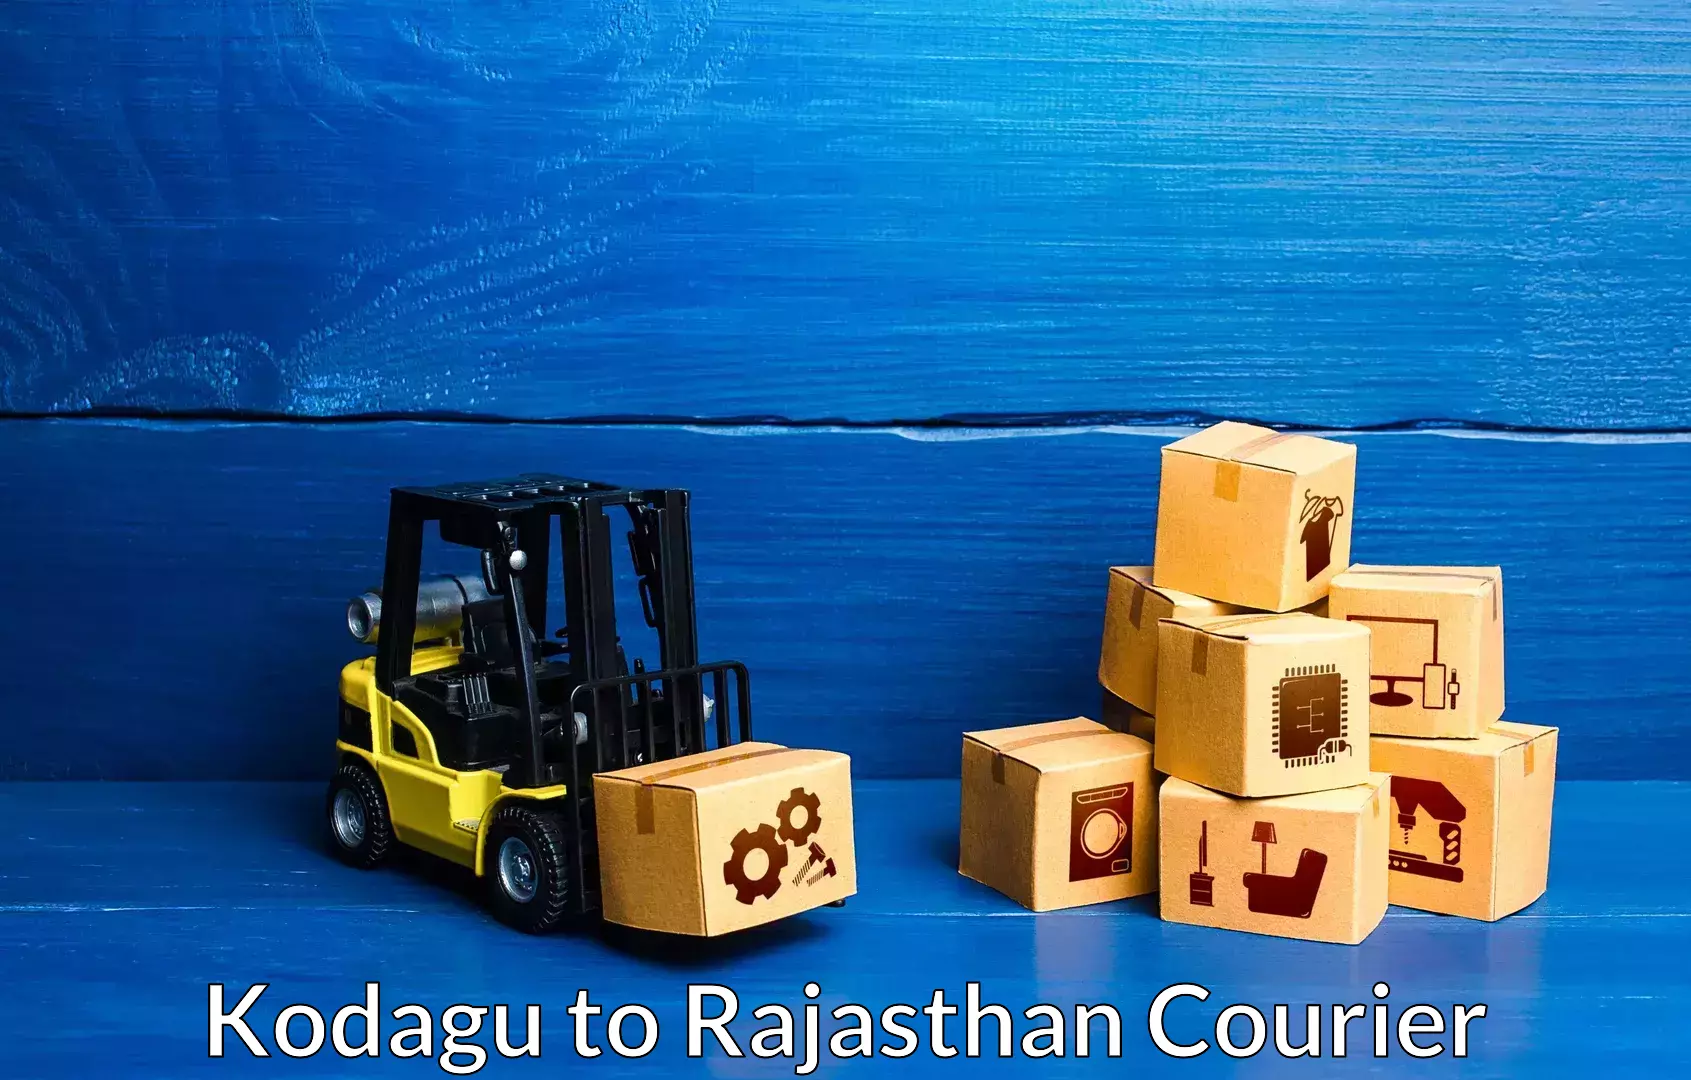 Trusted relocation experts Kodagu to Rajasthan